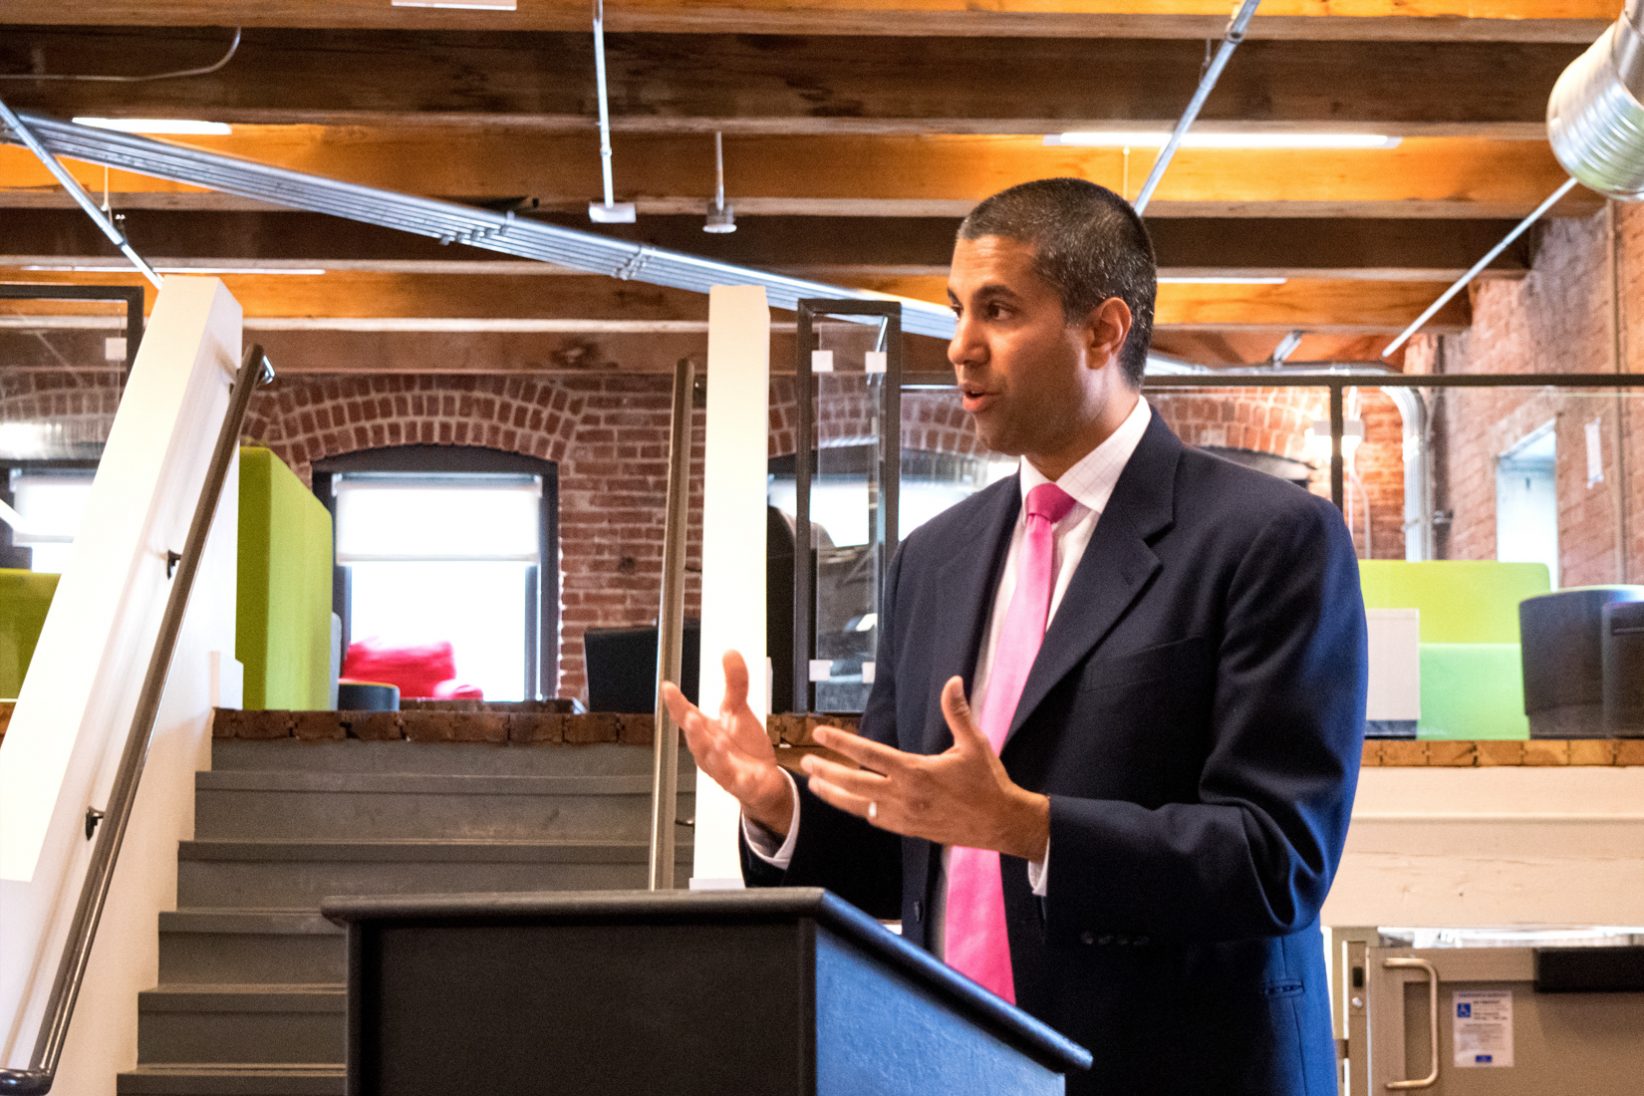 New FCC chairman Ajit Pai is familiar with KC startup community